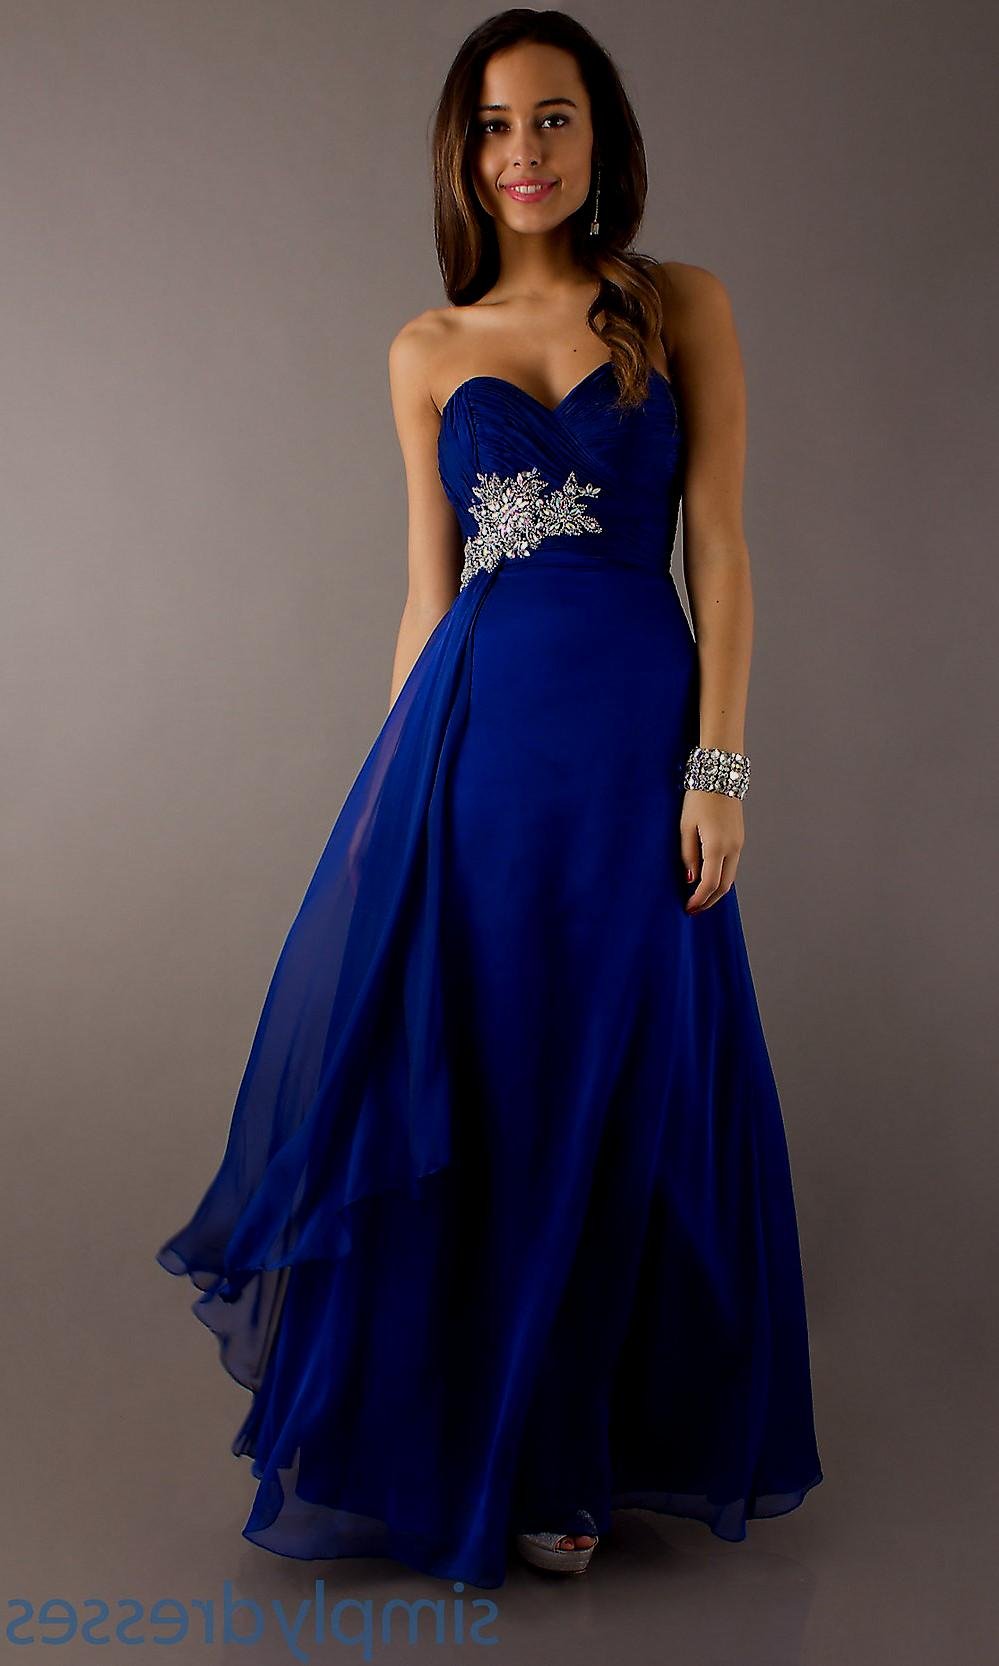 Top Electric Blue Dress For Wedding  Learn more here 